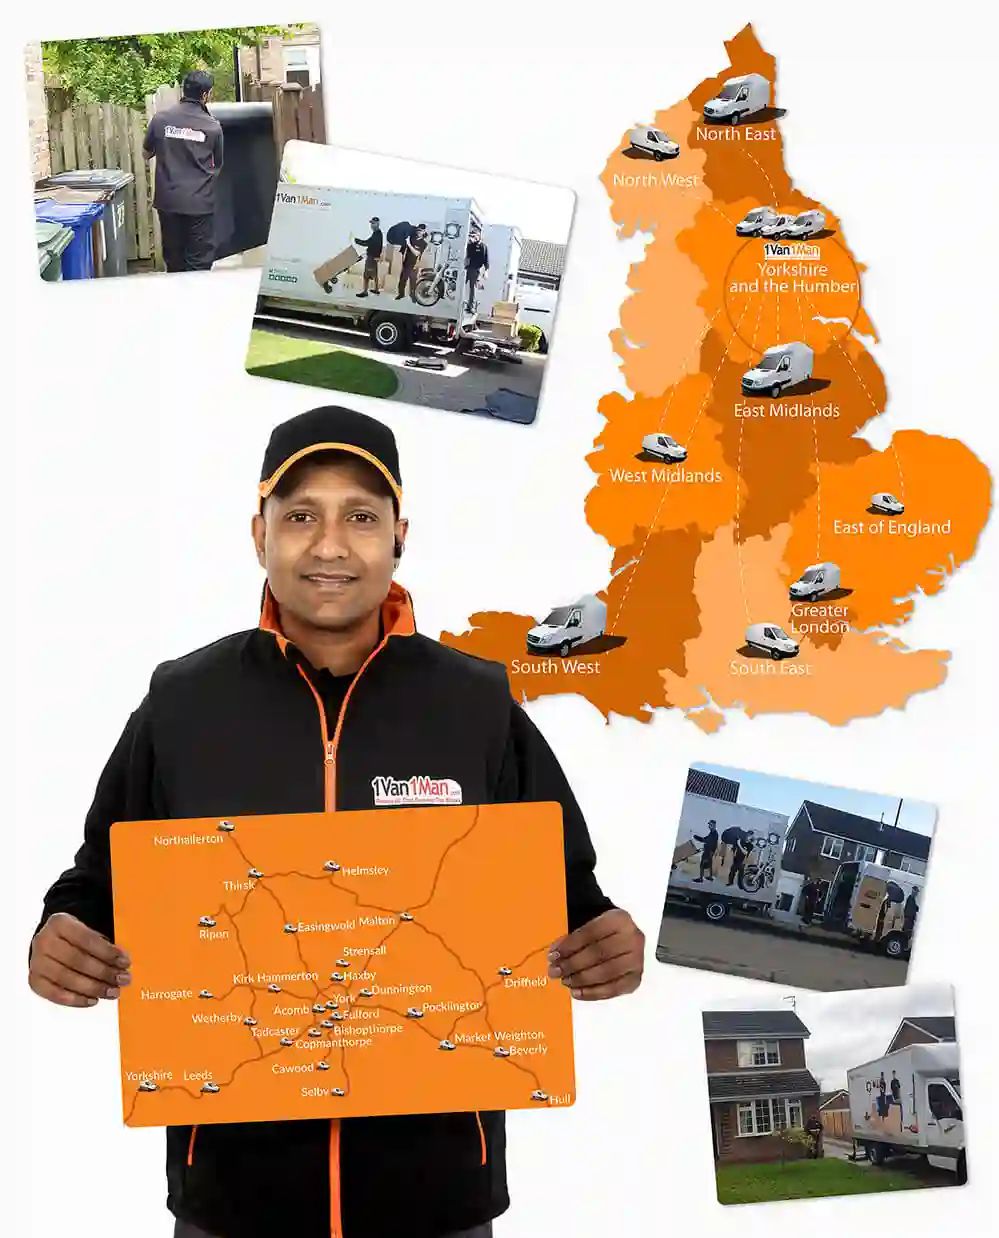 Relocating? Let us handle your house removals!